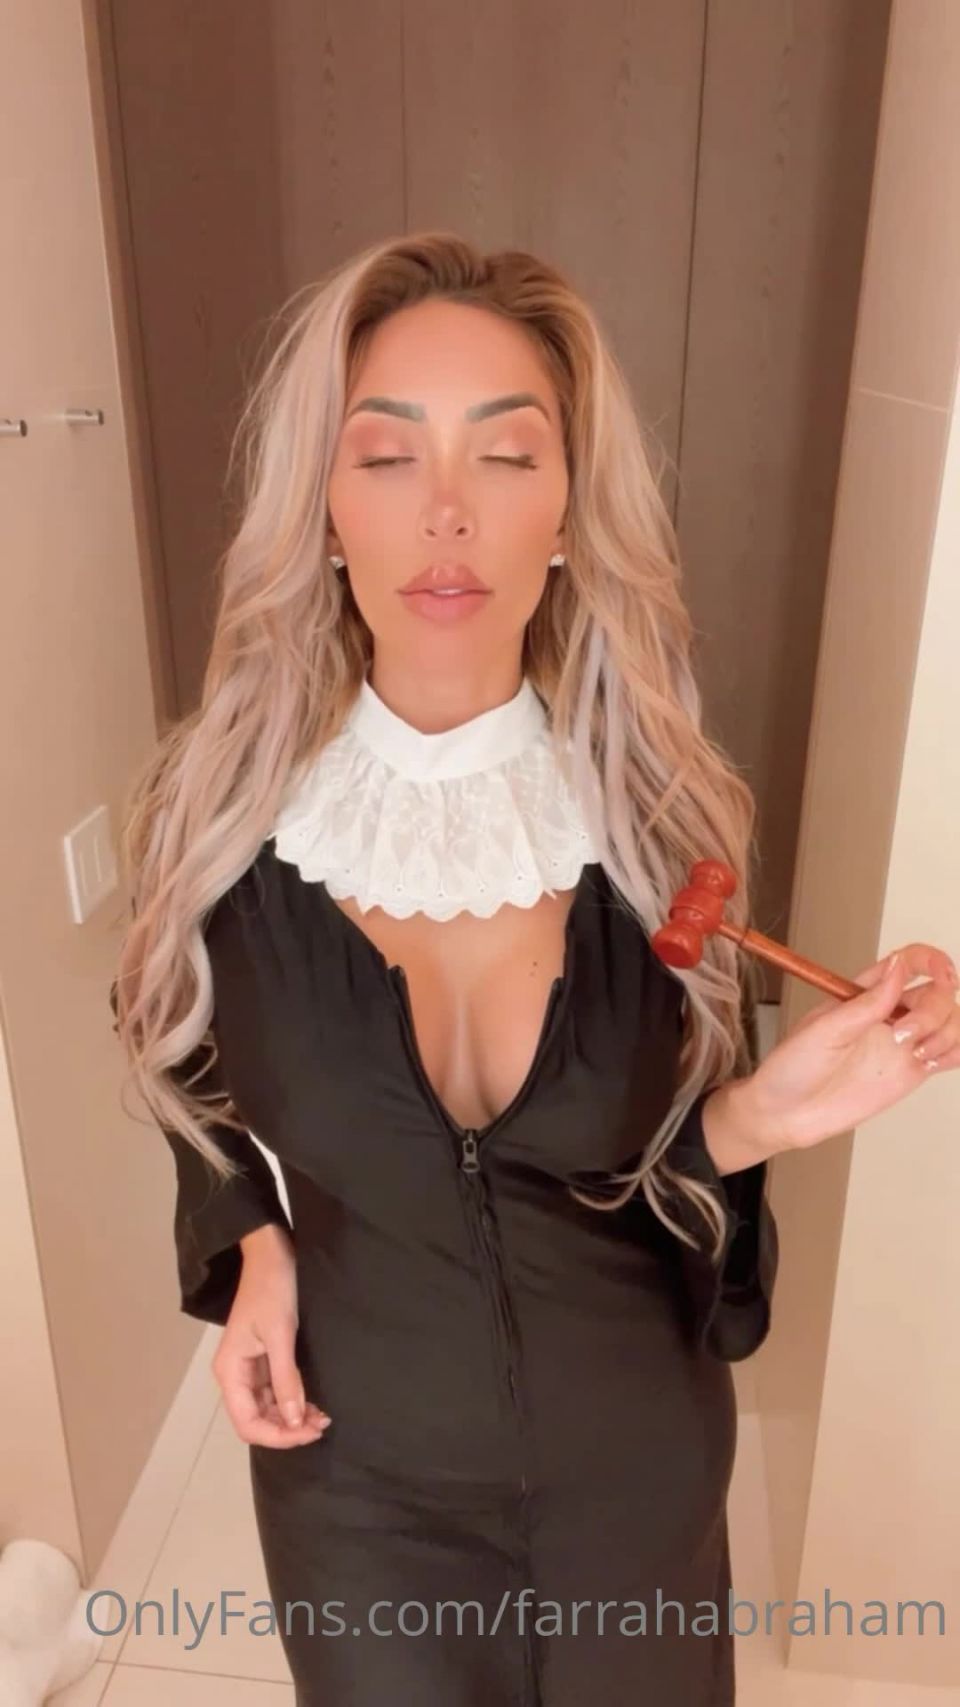 online xxx video 35 xvideos anal hardcore hardcore porn | FARRAH ABRAHAM / Onlyfans Farrahabraham - its farrahs court keeping it fair tip now on the law school fund and get you 27-08-2021 - OnlyFans | hardcore